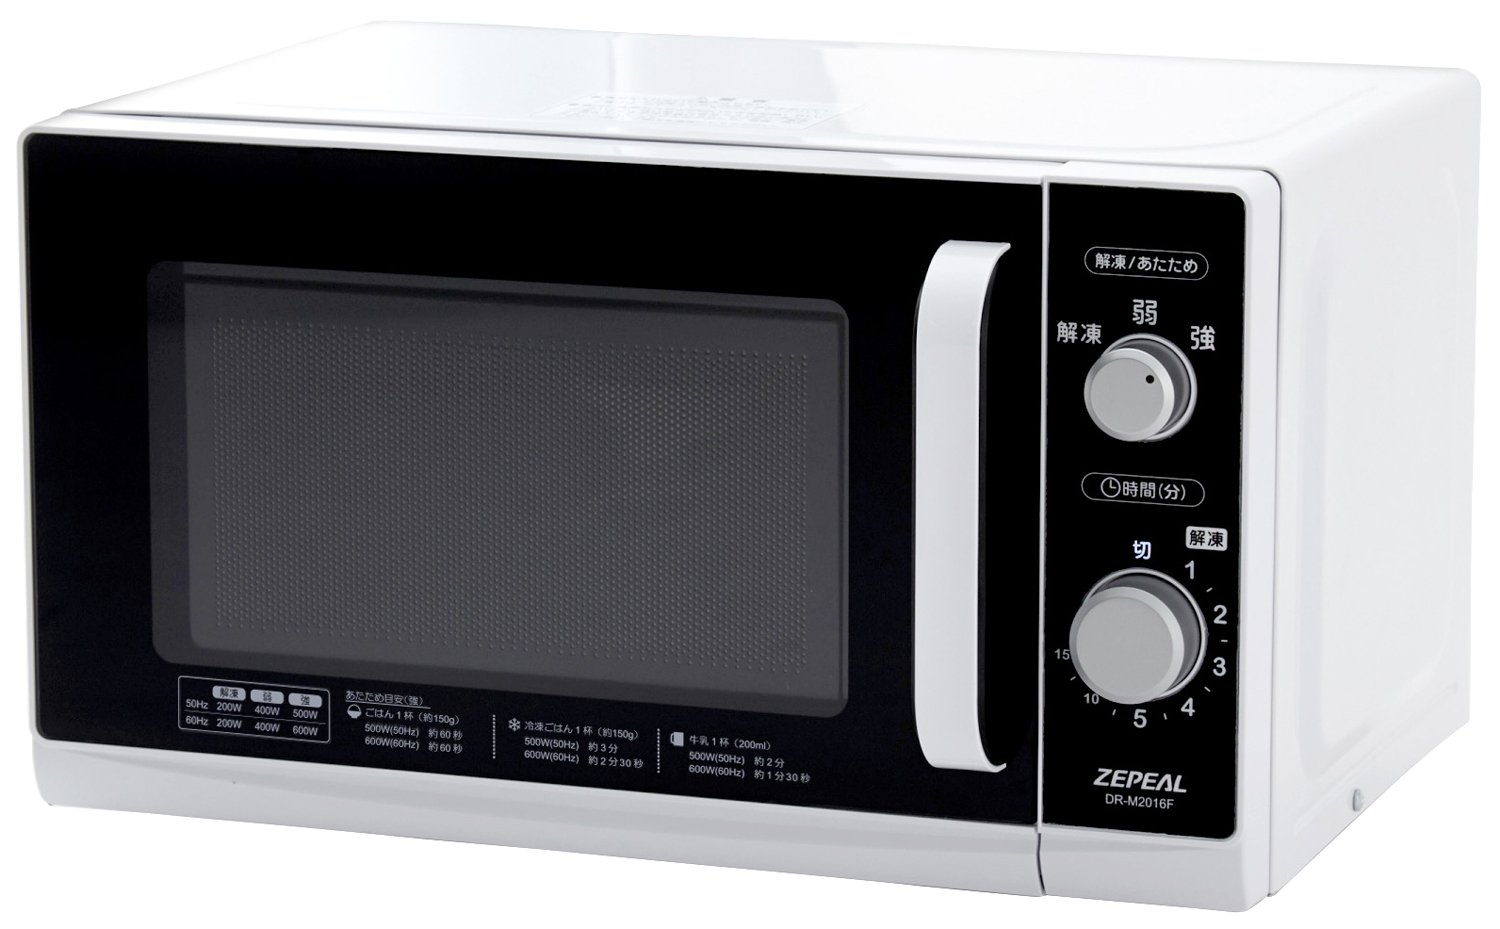 ZEPEAL hertz free single function microwave oven 18L DR-M2016F